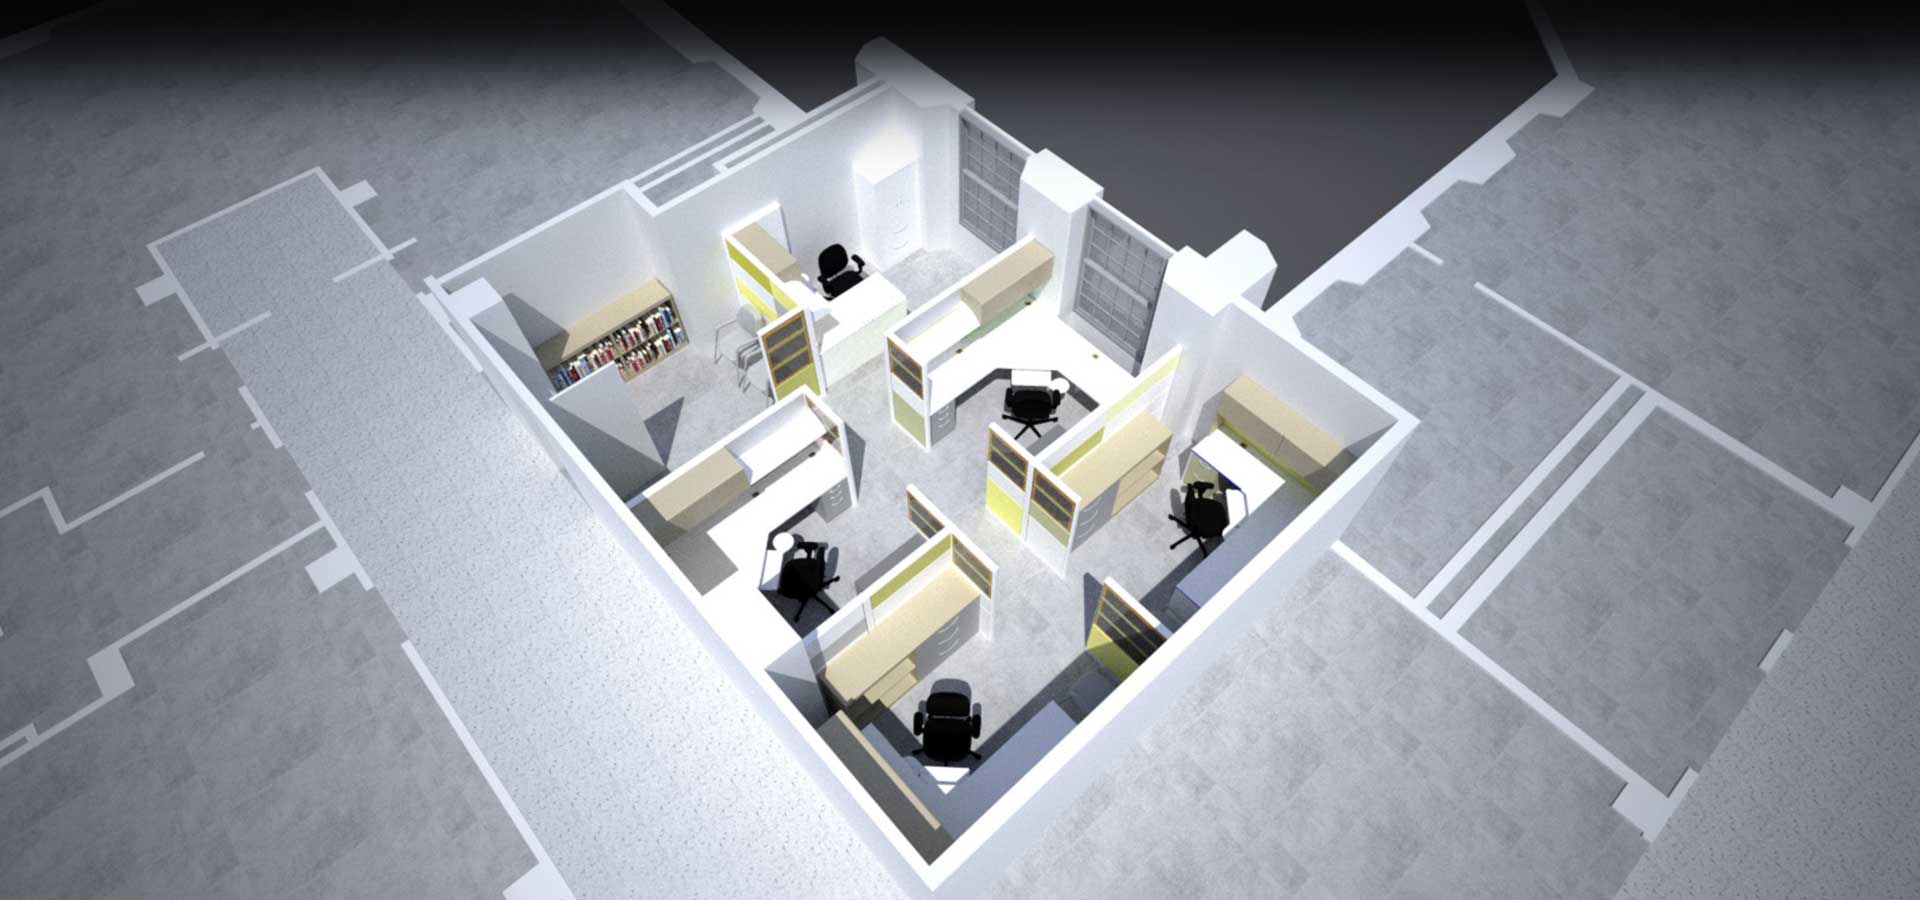 overview of office architecture by kohn architecture nyc commercial space architecture for nyc department of buildings zoning and changing certificates of occupancy